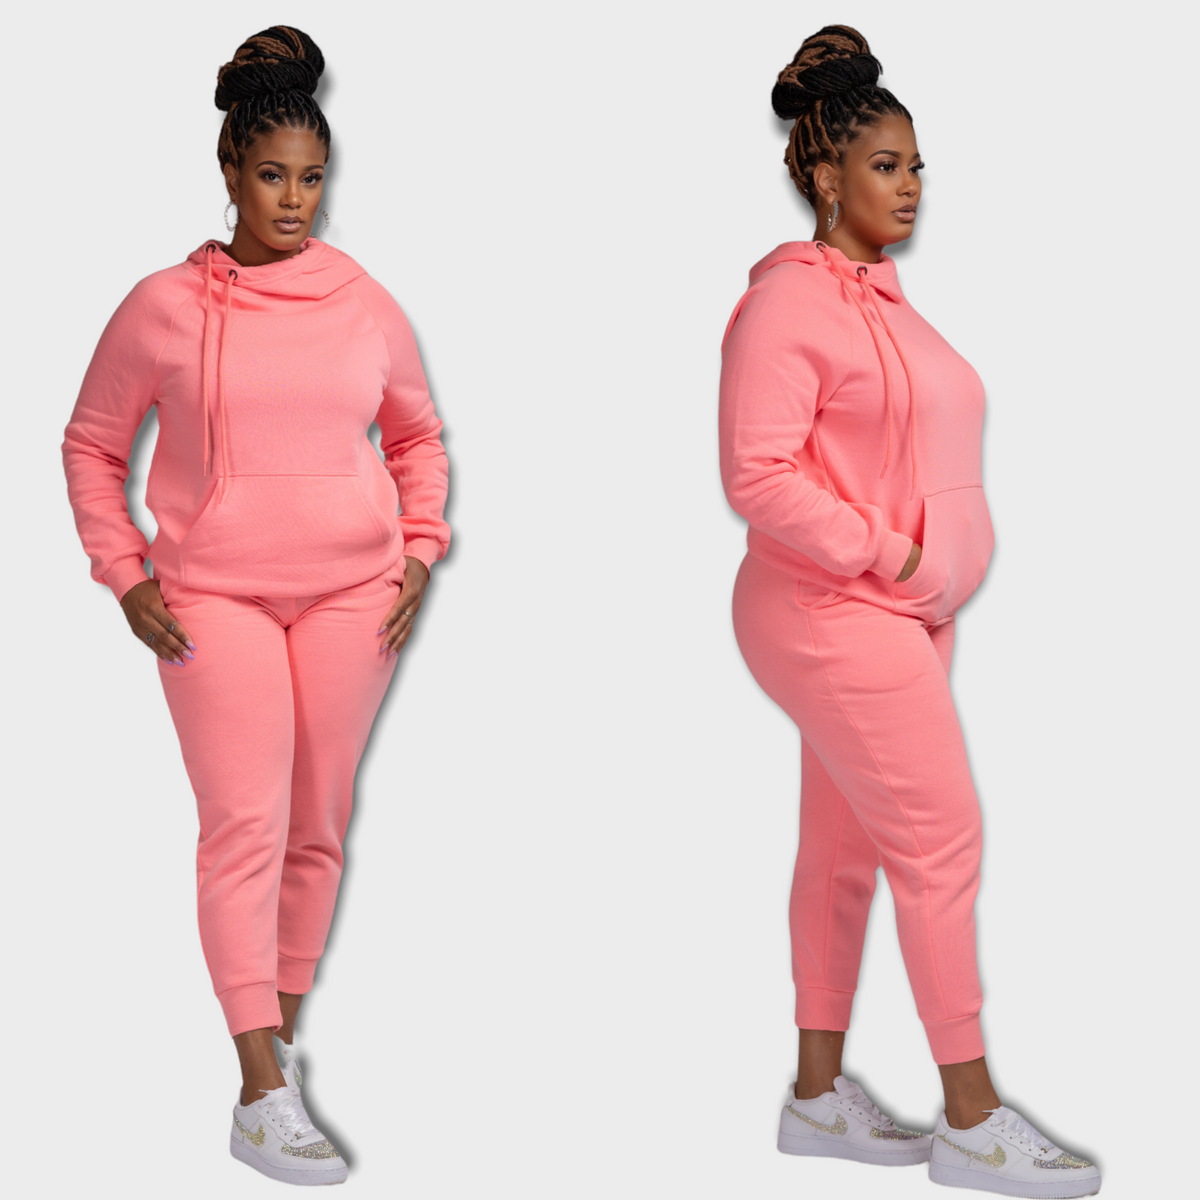 Final Sale Plus Size Jogger Set in Pink with Animal Print